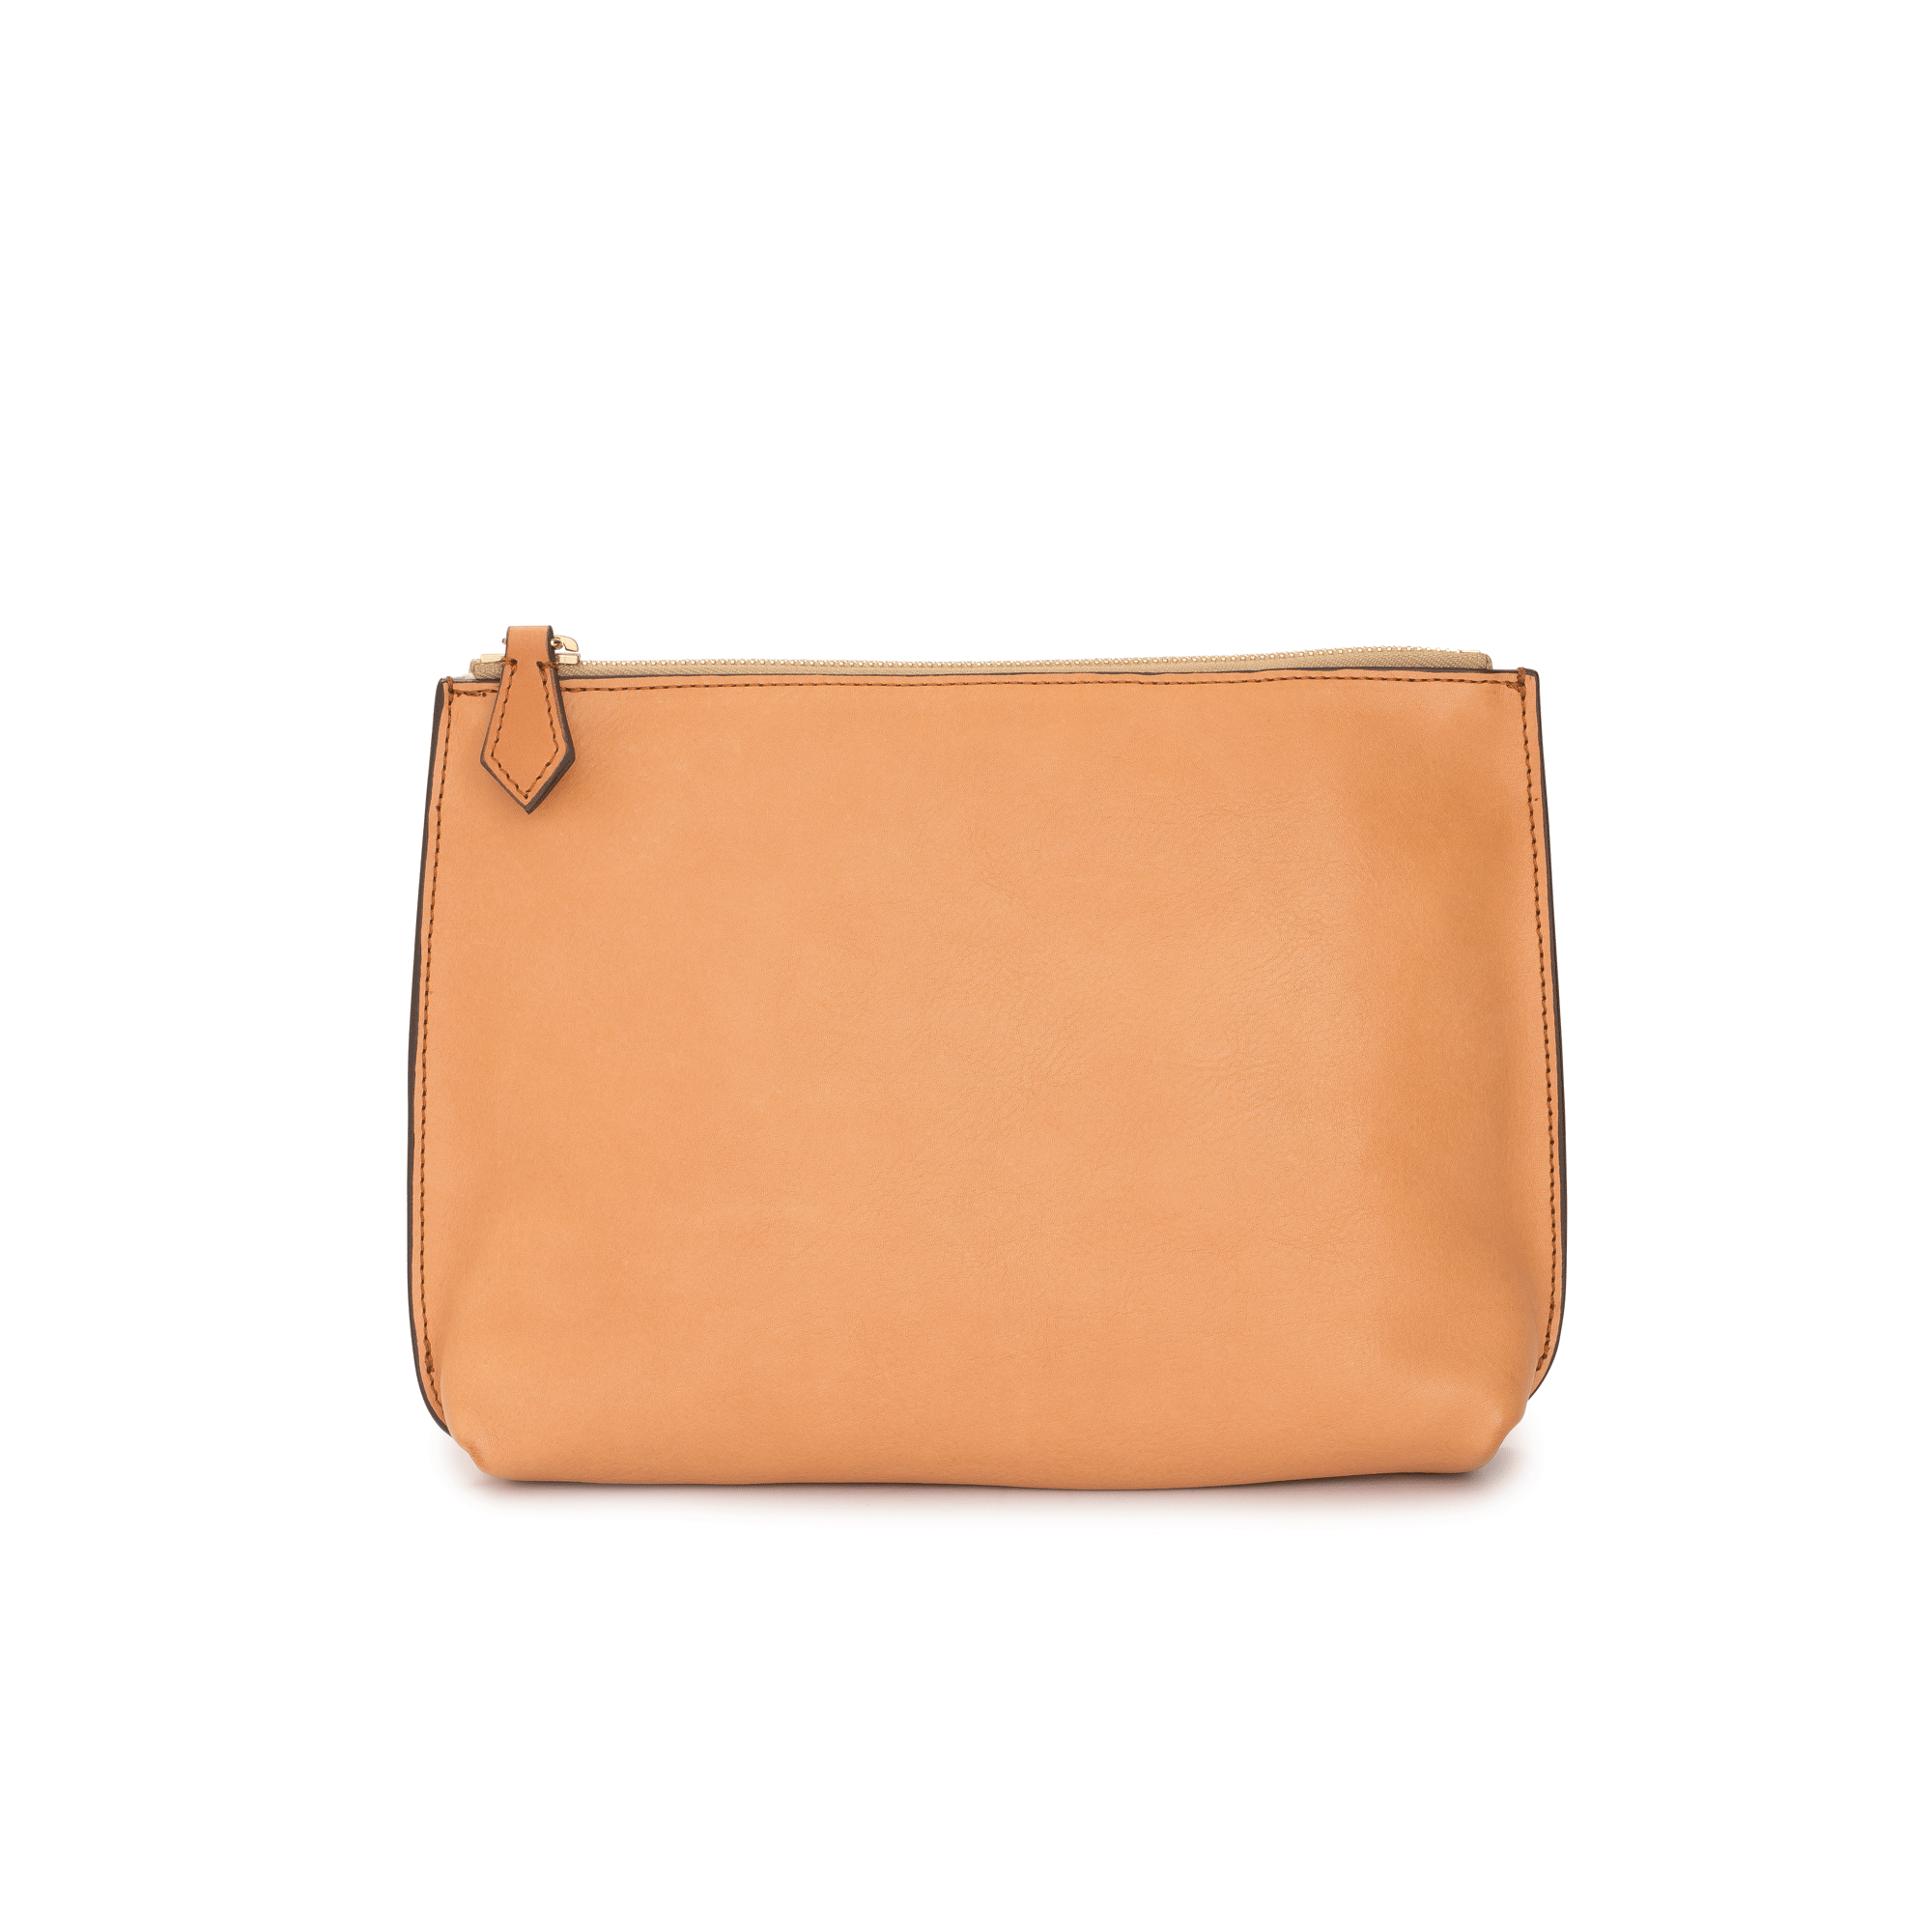 The Classic Cross-Body Bag in Natural